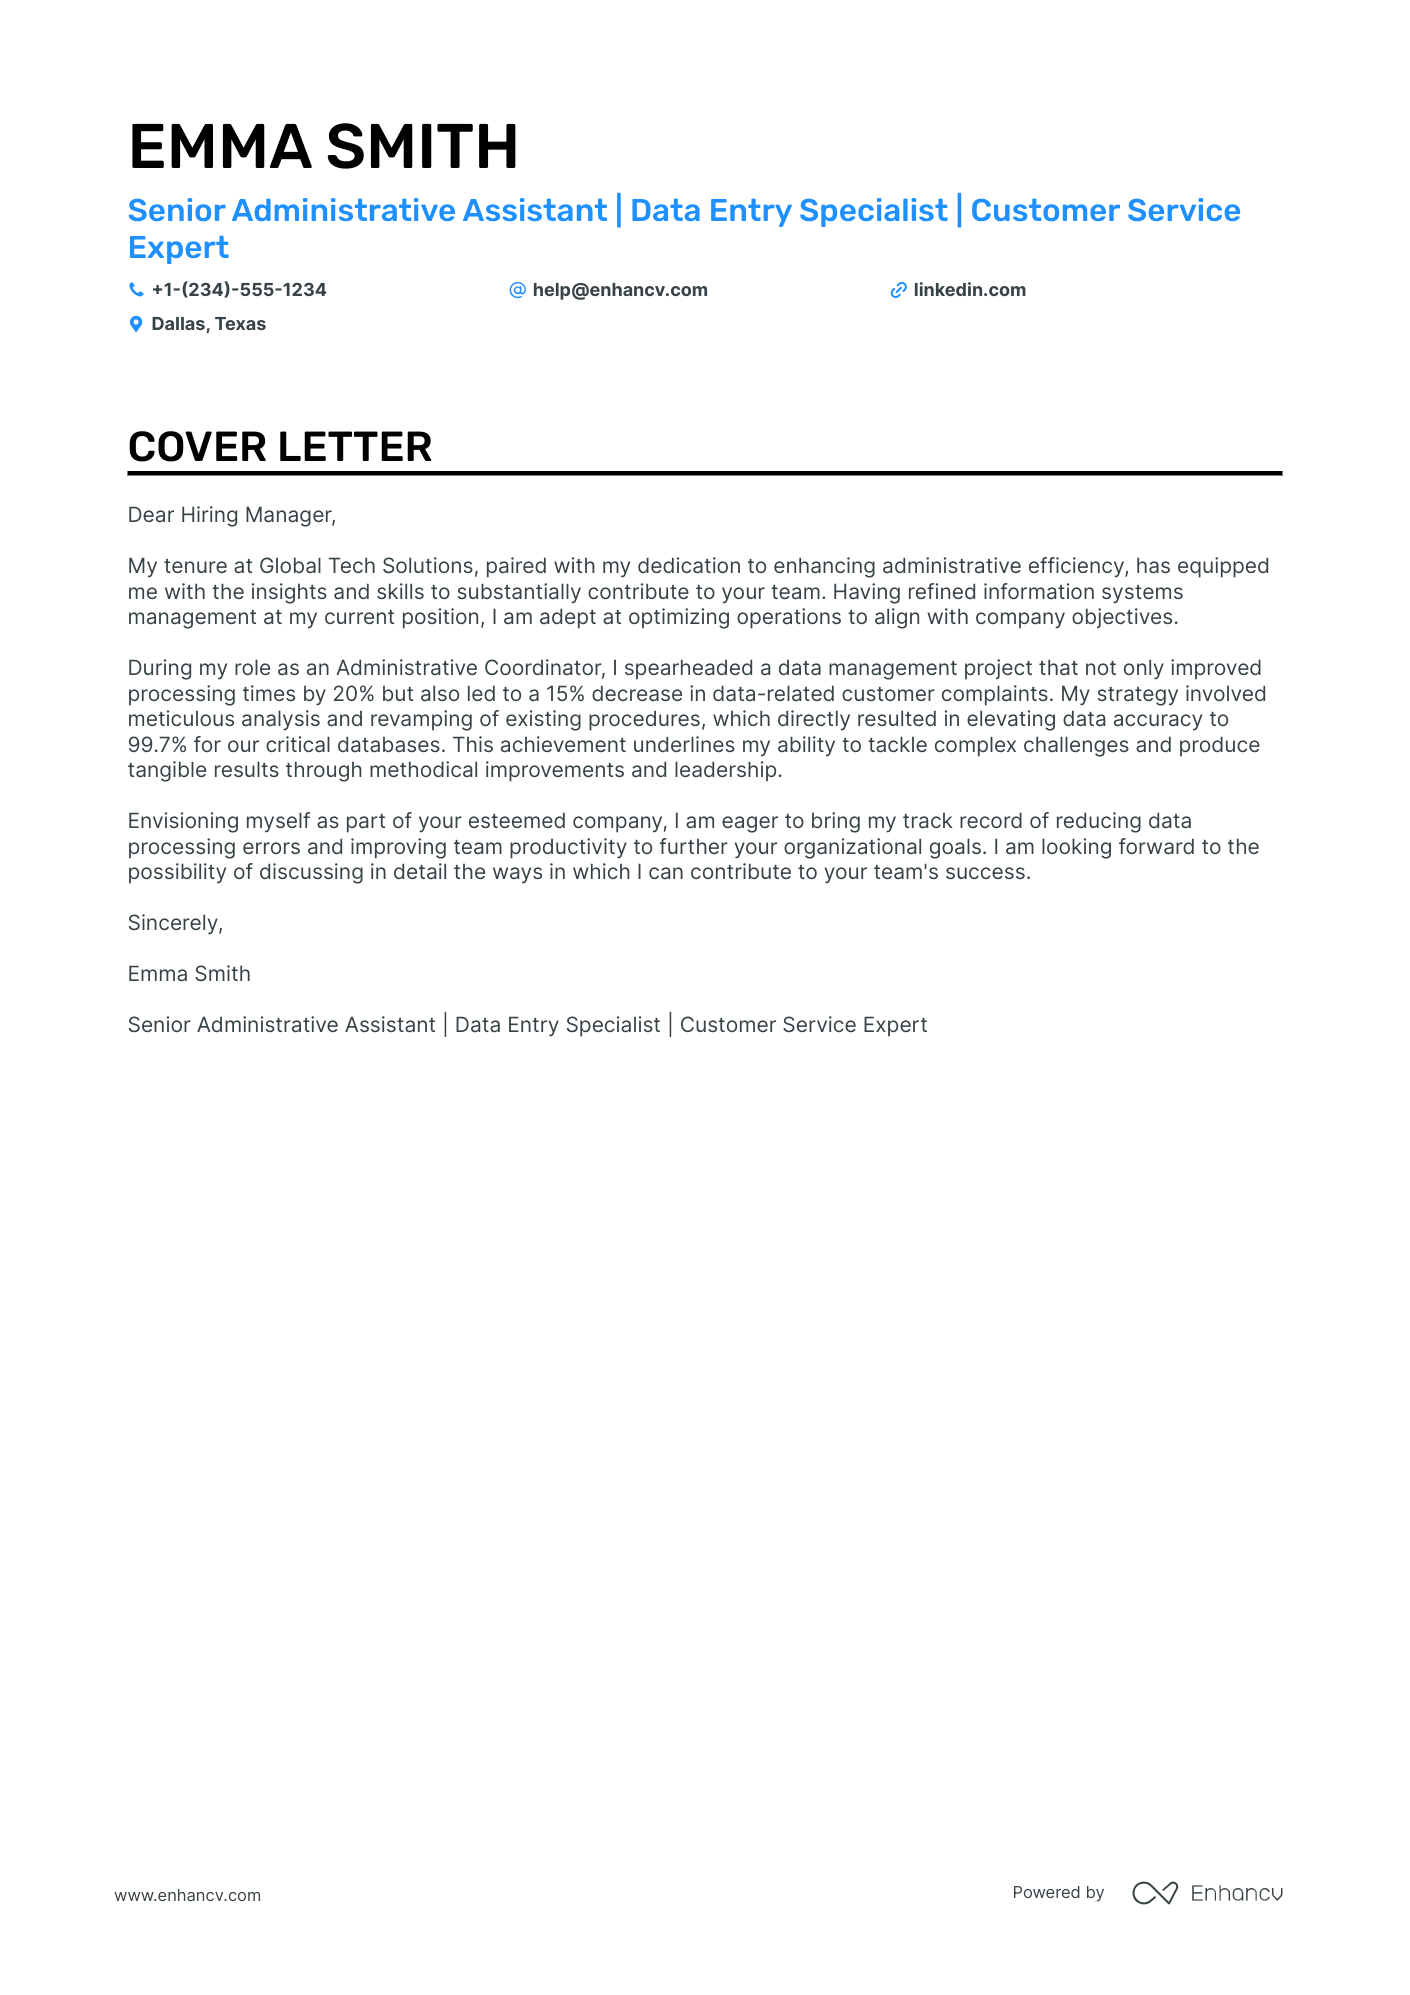 sample cover letter for data entry job without experience